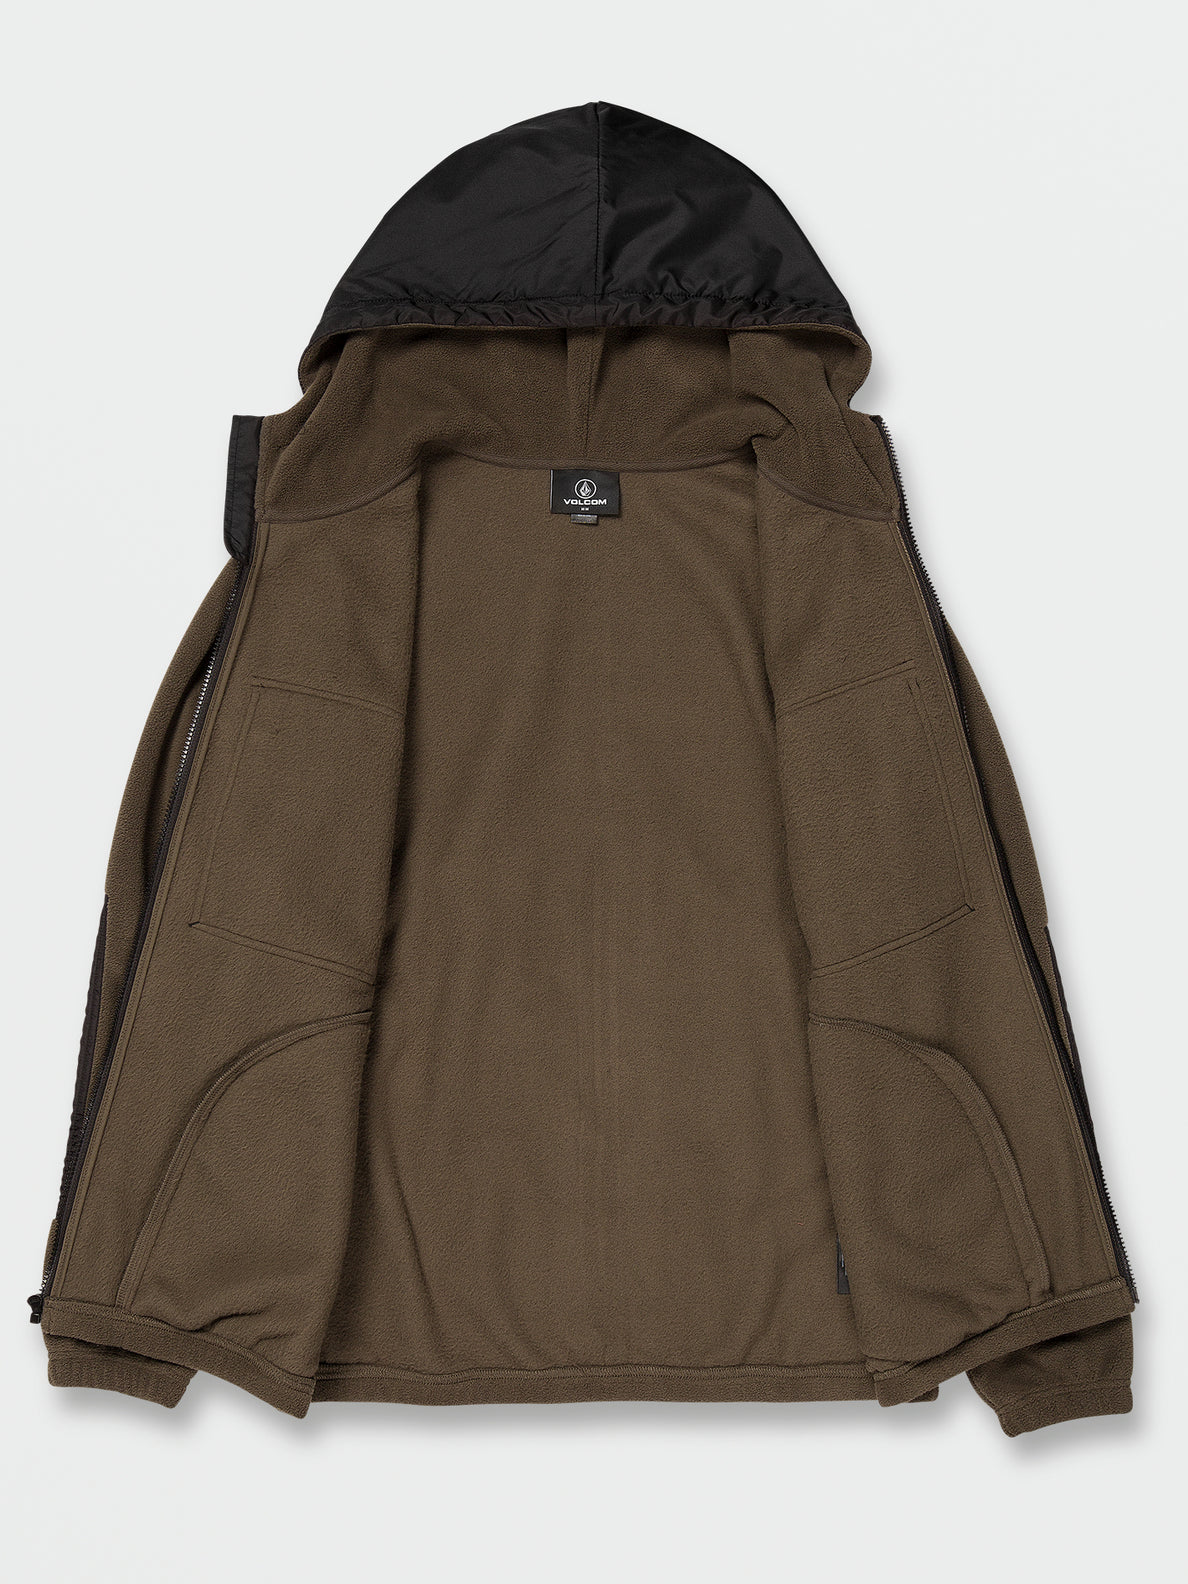 Yzzolater Lined Zip Hoodie - Dark Olive (A5842200_DKO) [2]